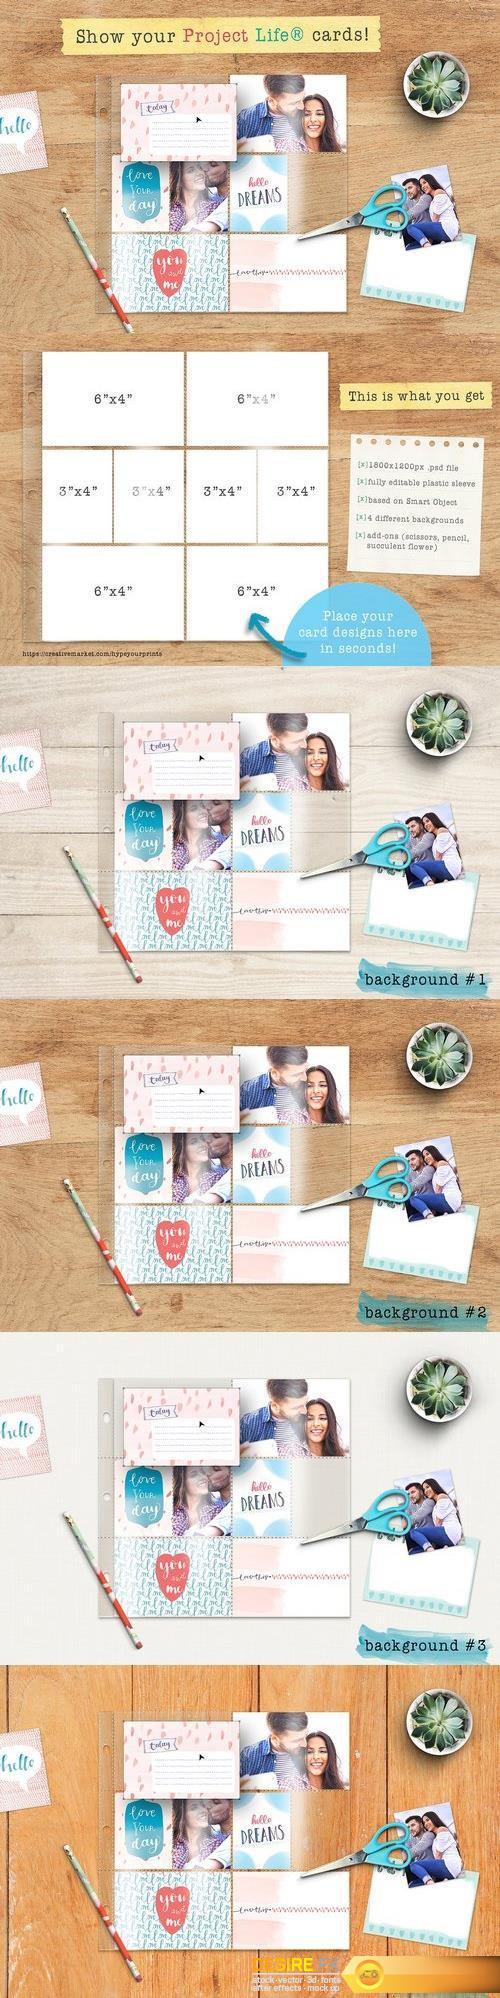 CM - Mockup for Project Life Cards 1312990